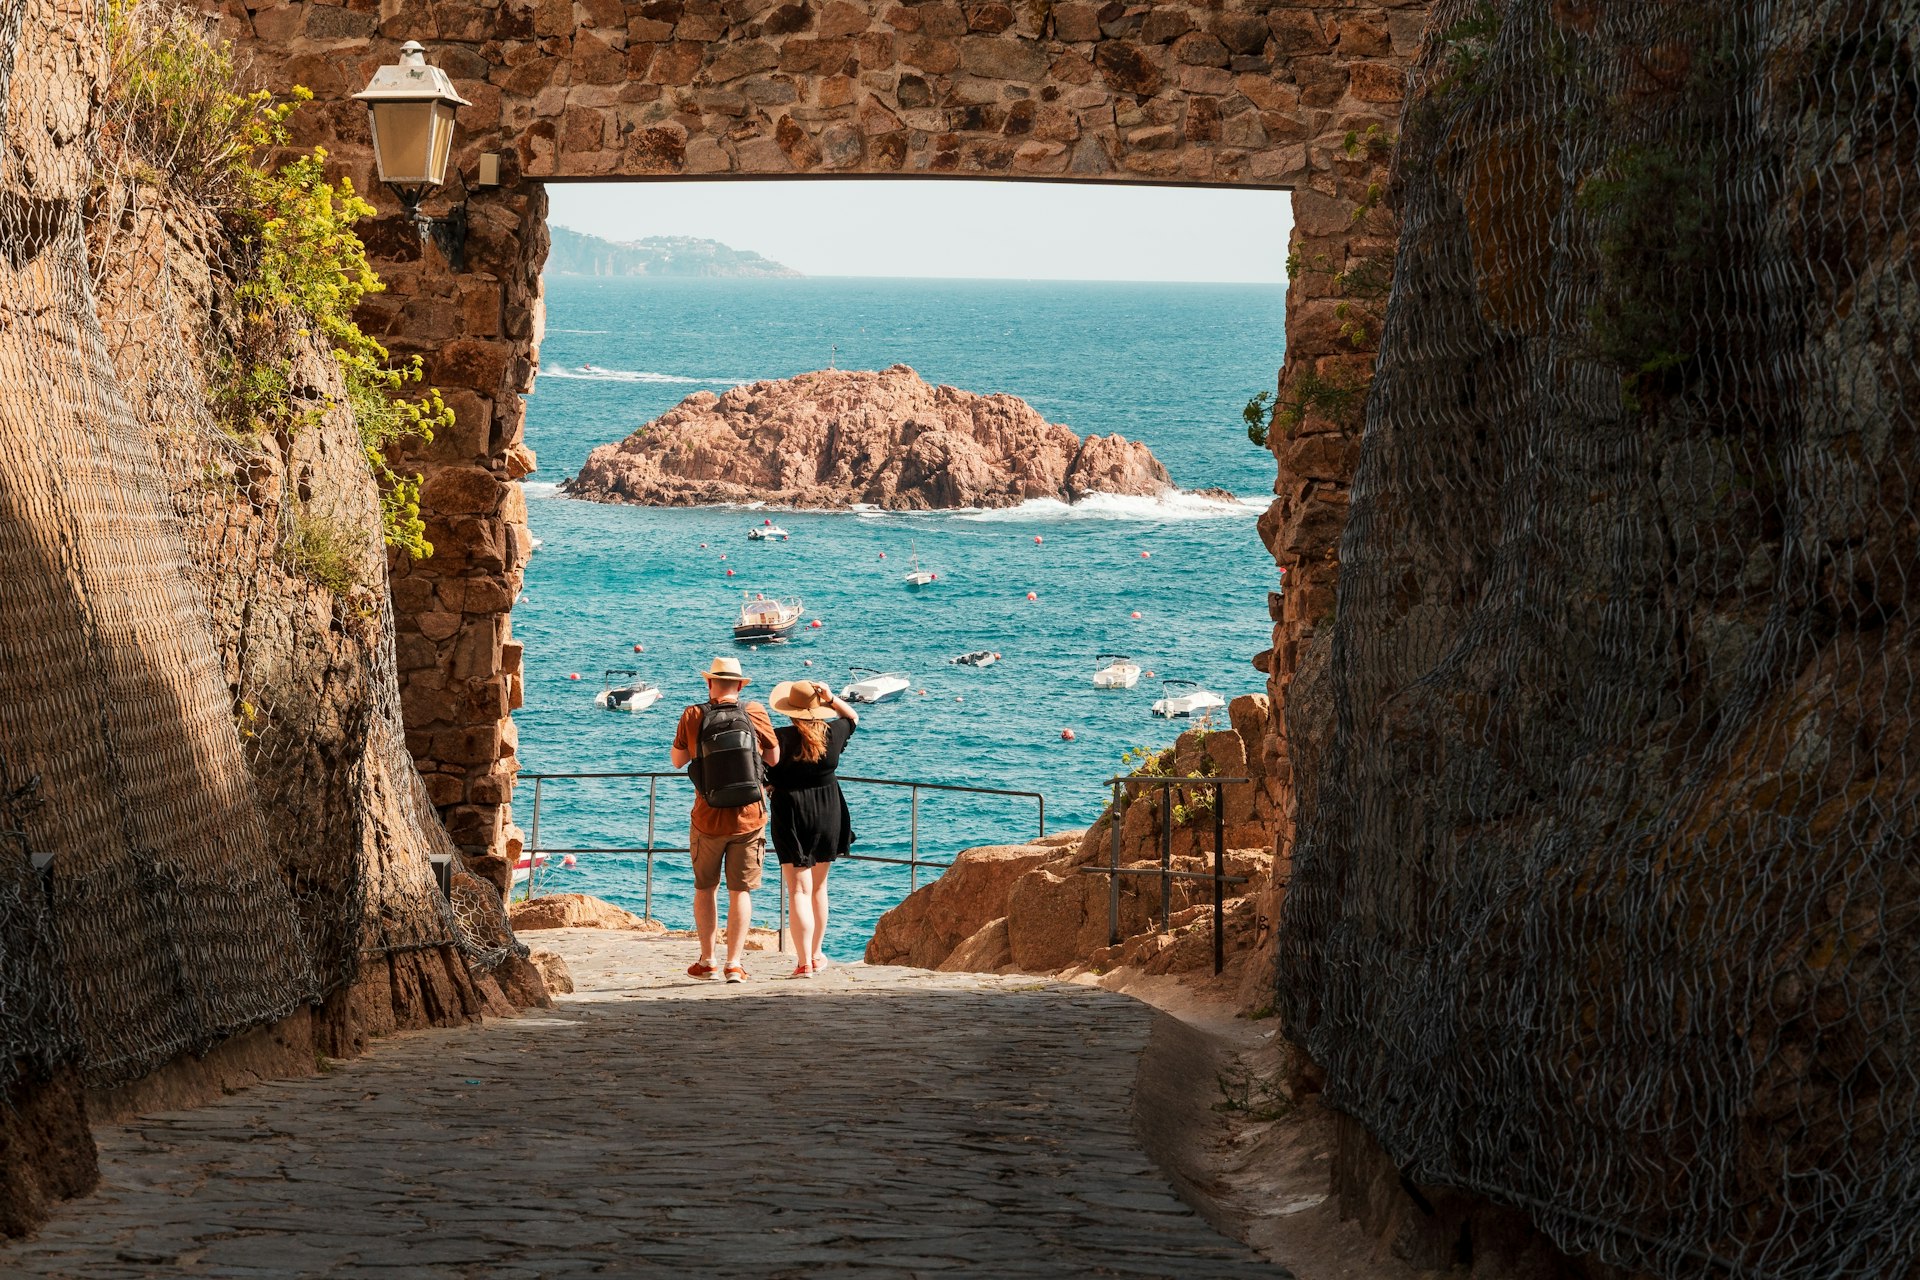 A couple at the gate to the Villa Vella fortress, looking out to the Mediterranean Sea, Tossa de Mar, Catalonia, Spain